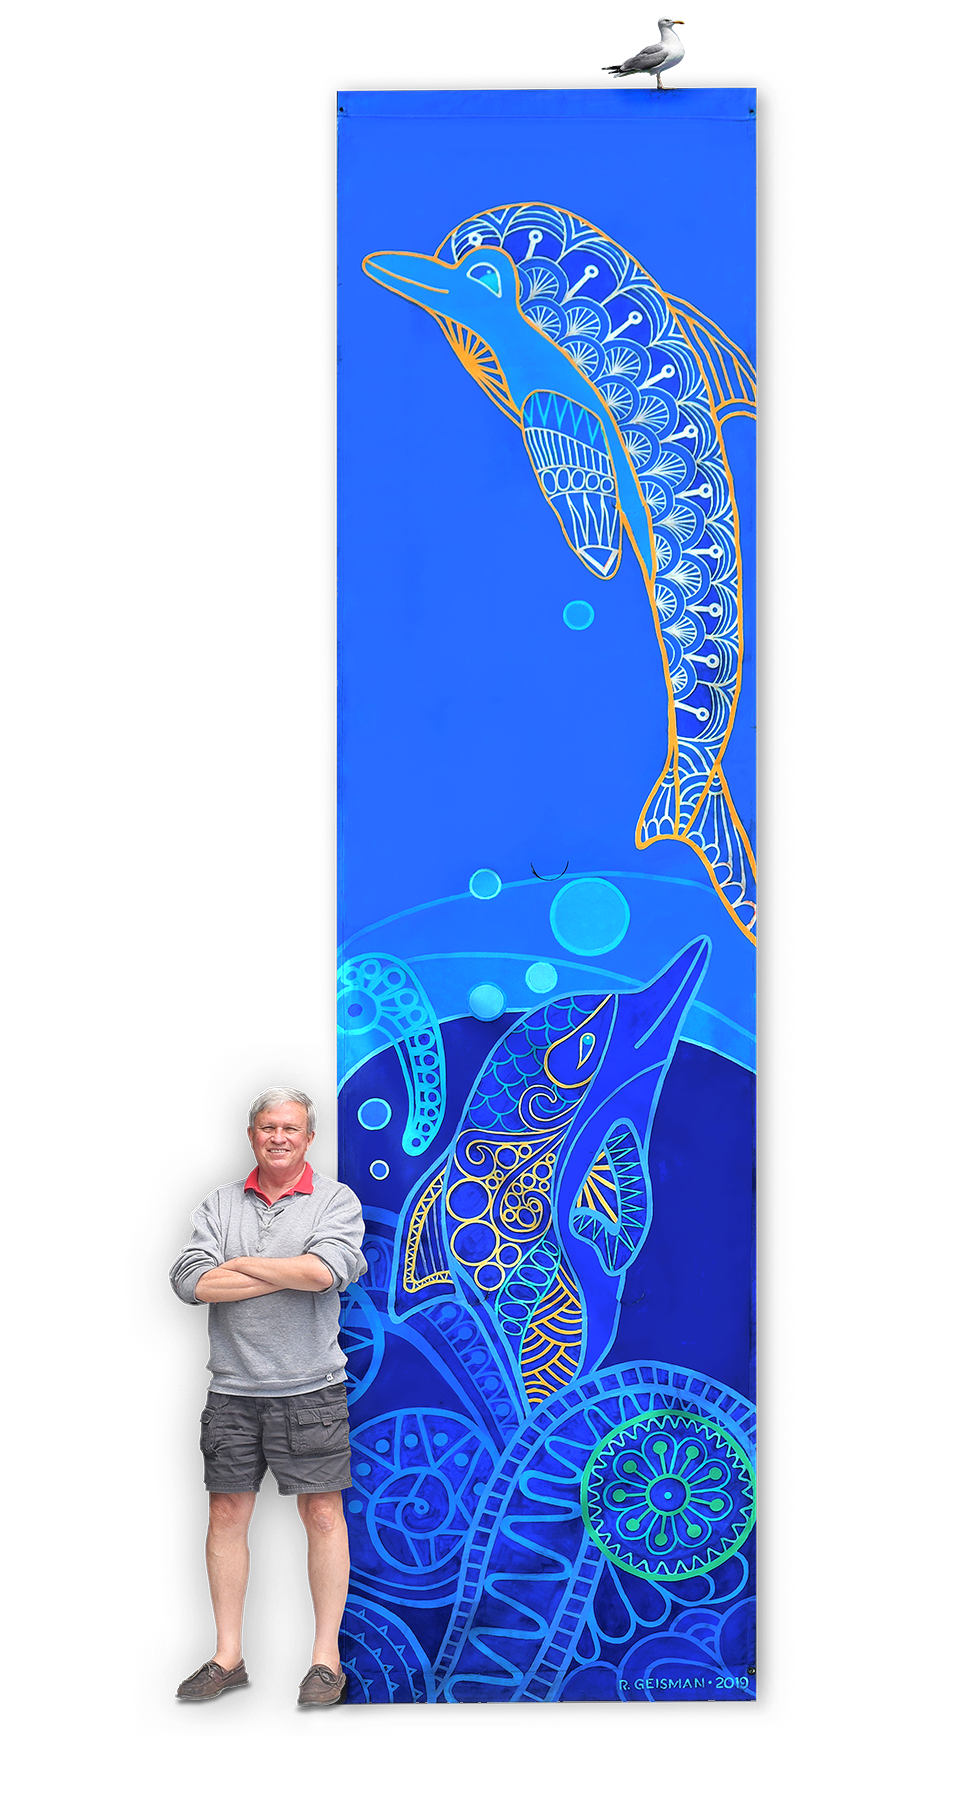 16' x 4' banner commissioned by the city of Laguna Beach.